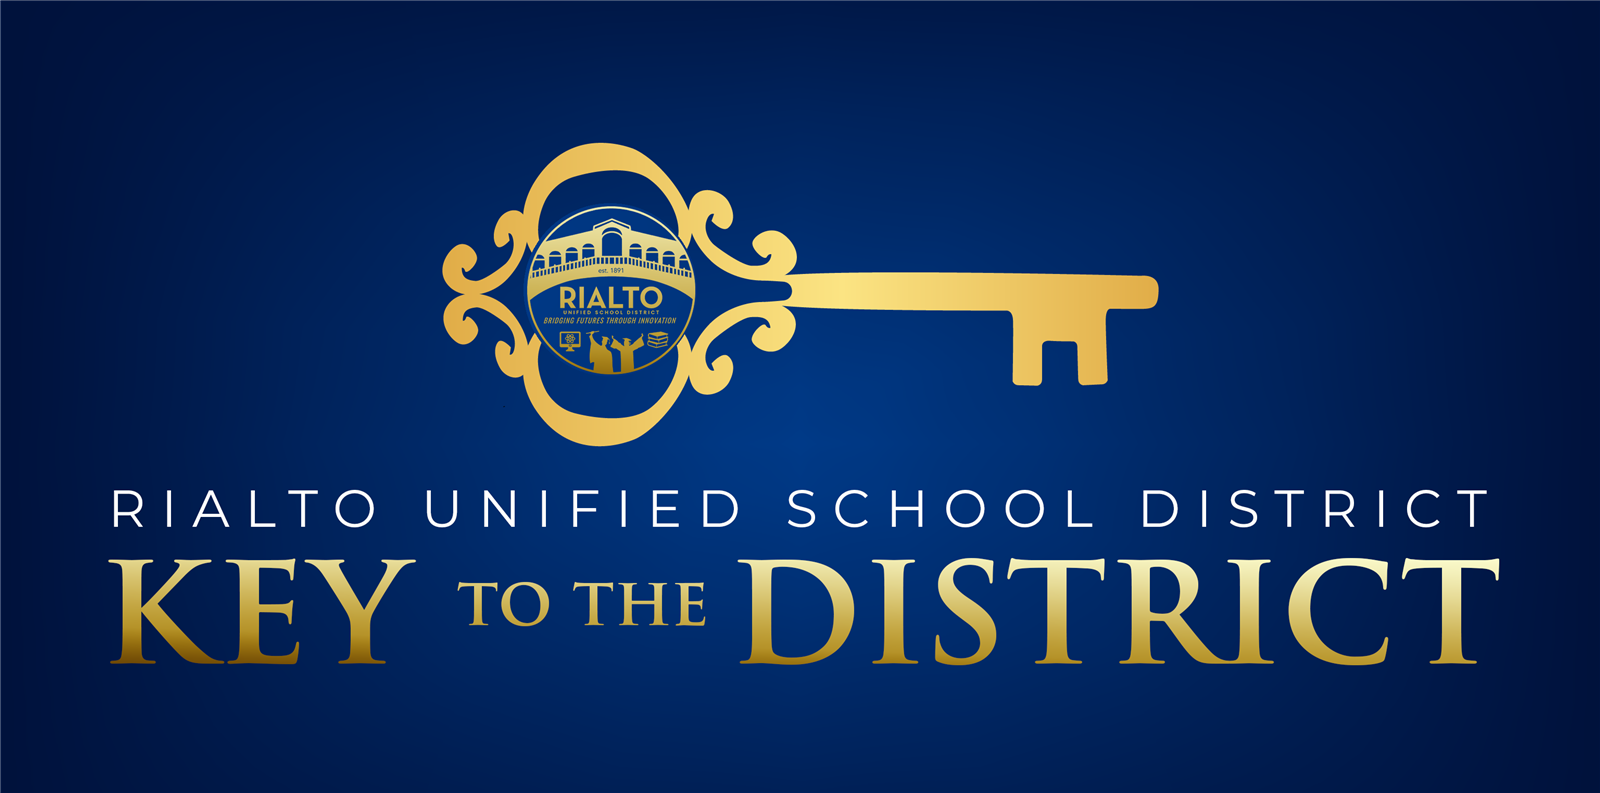 Rialto Unified School District Key to the District